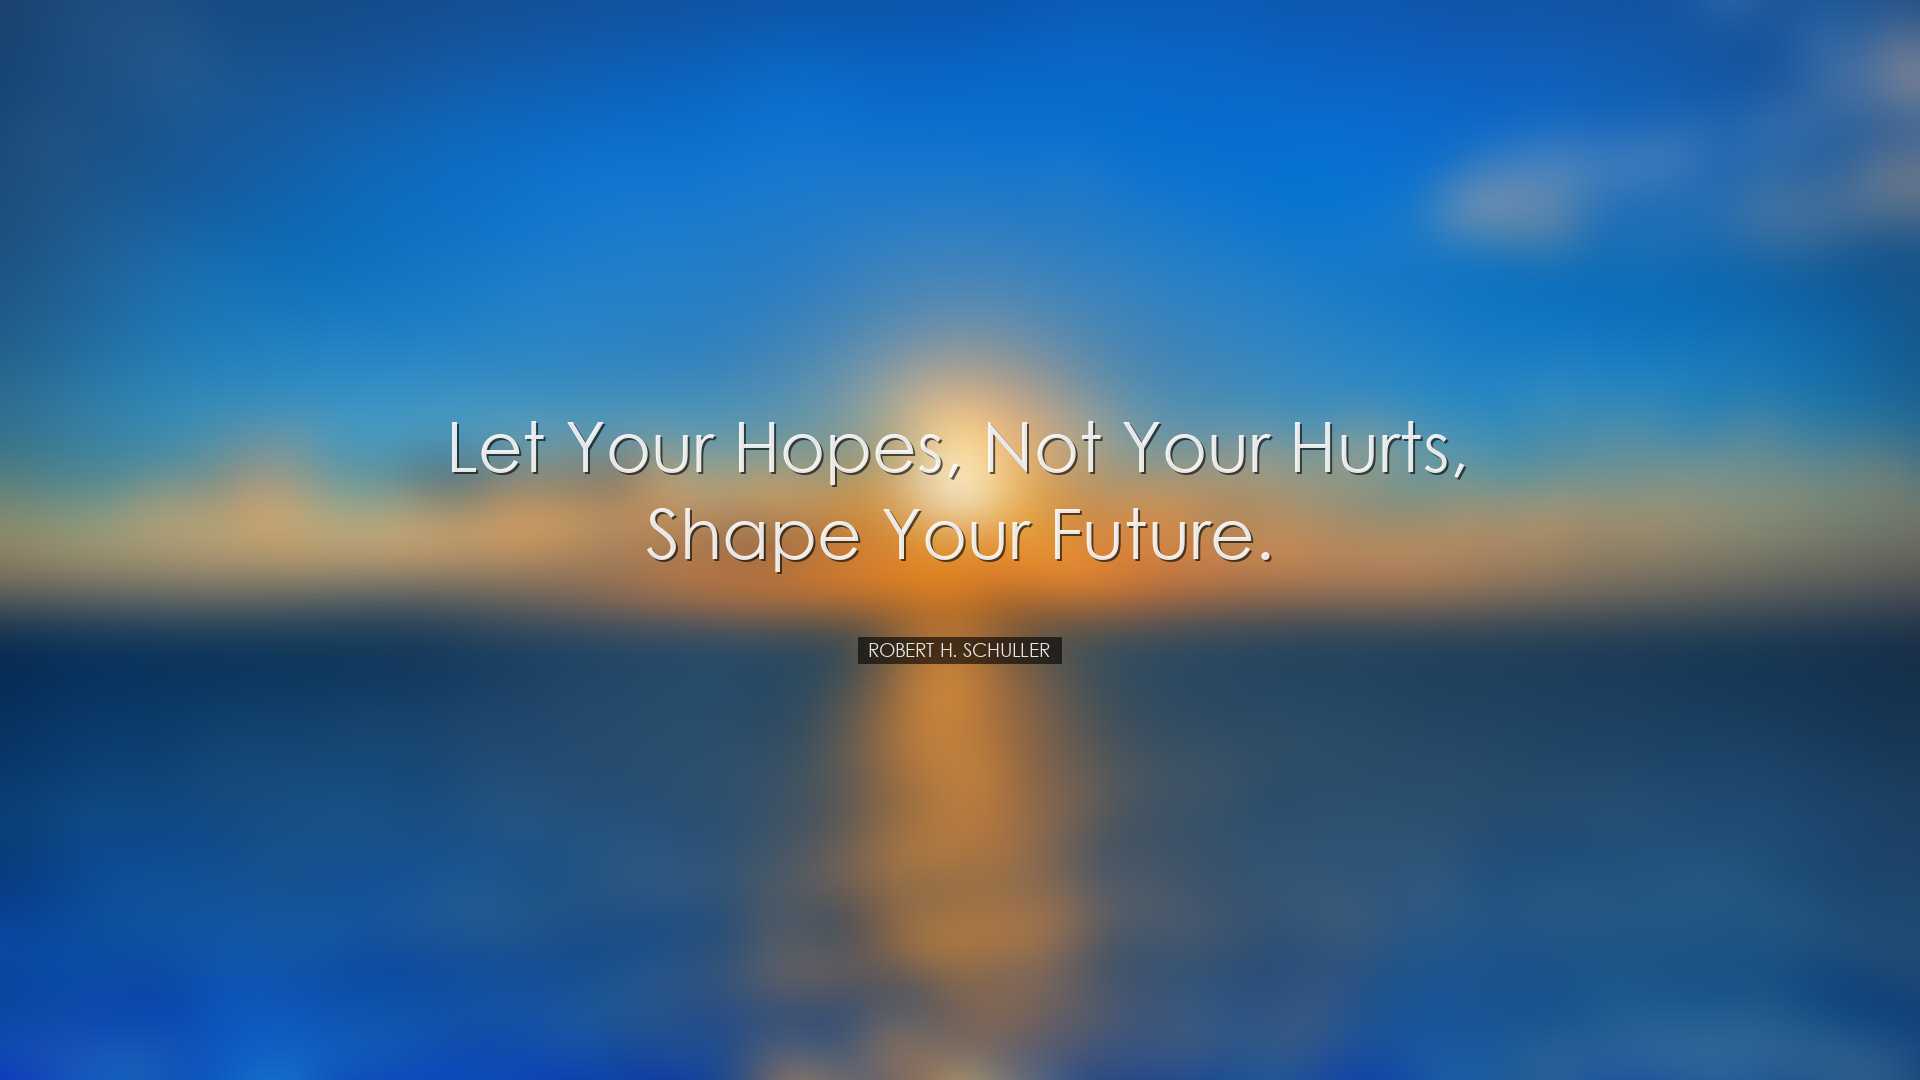 Let your hopes, not your hurts, shape your future. - Robert H. Sch